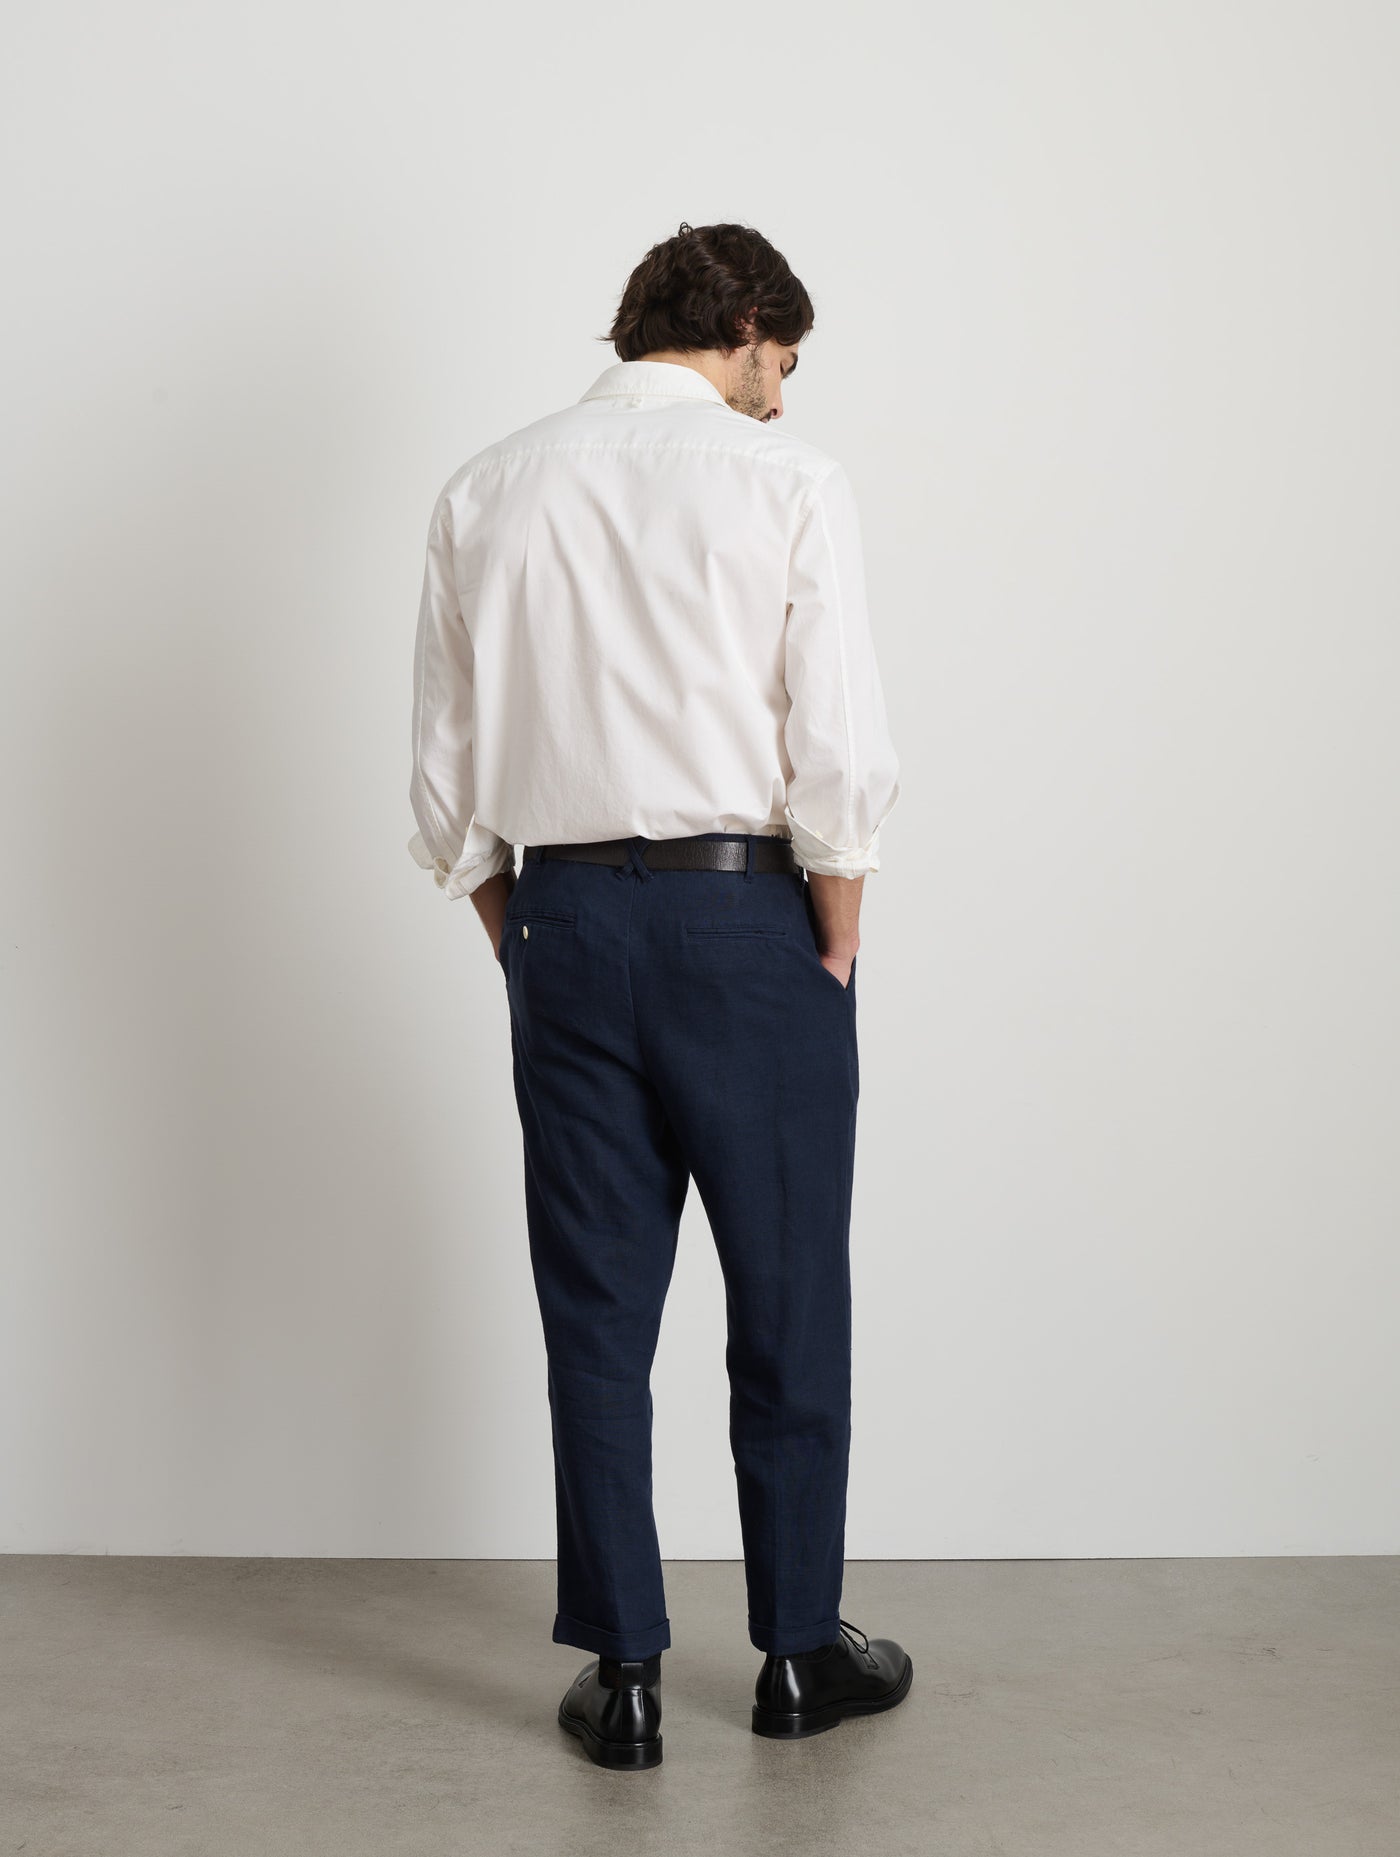 Alex Mill's Pleated Pants Will Convince You to Ditch the Flat